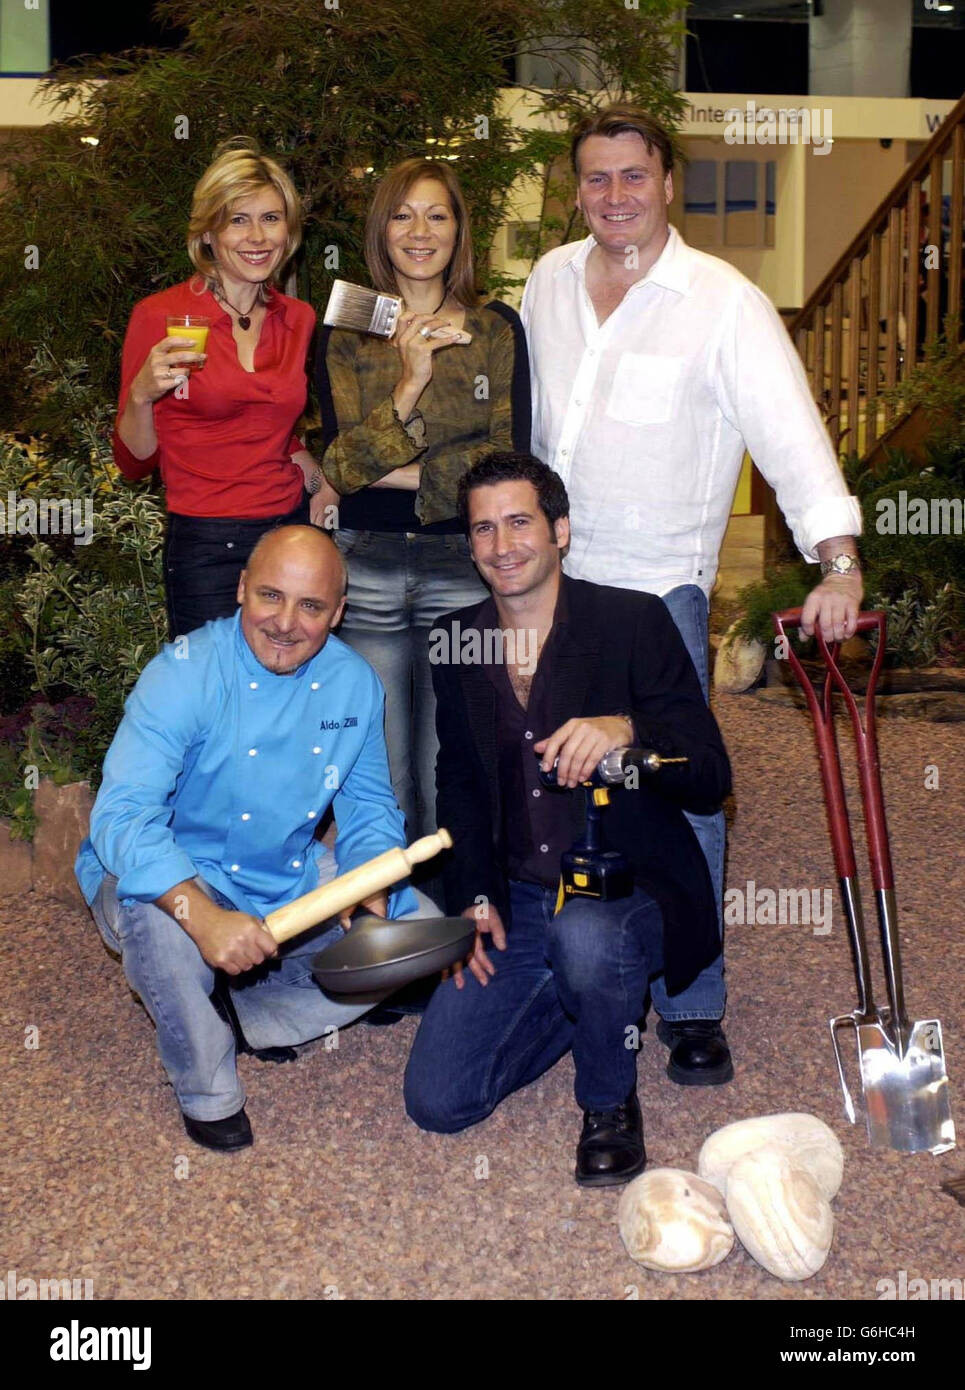 Celebrities (from left to right) Amanda Ursell, Aldo Zilli, Oliver Heath, Anna Ryder Richardson and David Domoney during a photocall to launch the Autumn Ideal Home Show 2003 at Earls Court in London. The exhibition will run from 3 - 12 October 2003 and launches in conjunction with the first national Love Your Home Week. Stock Photo